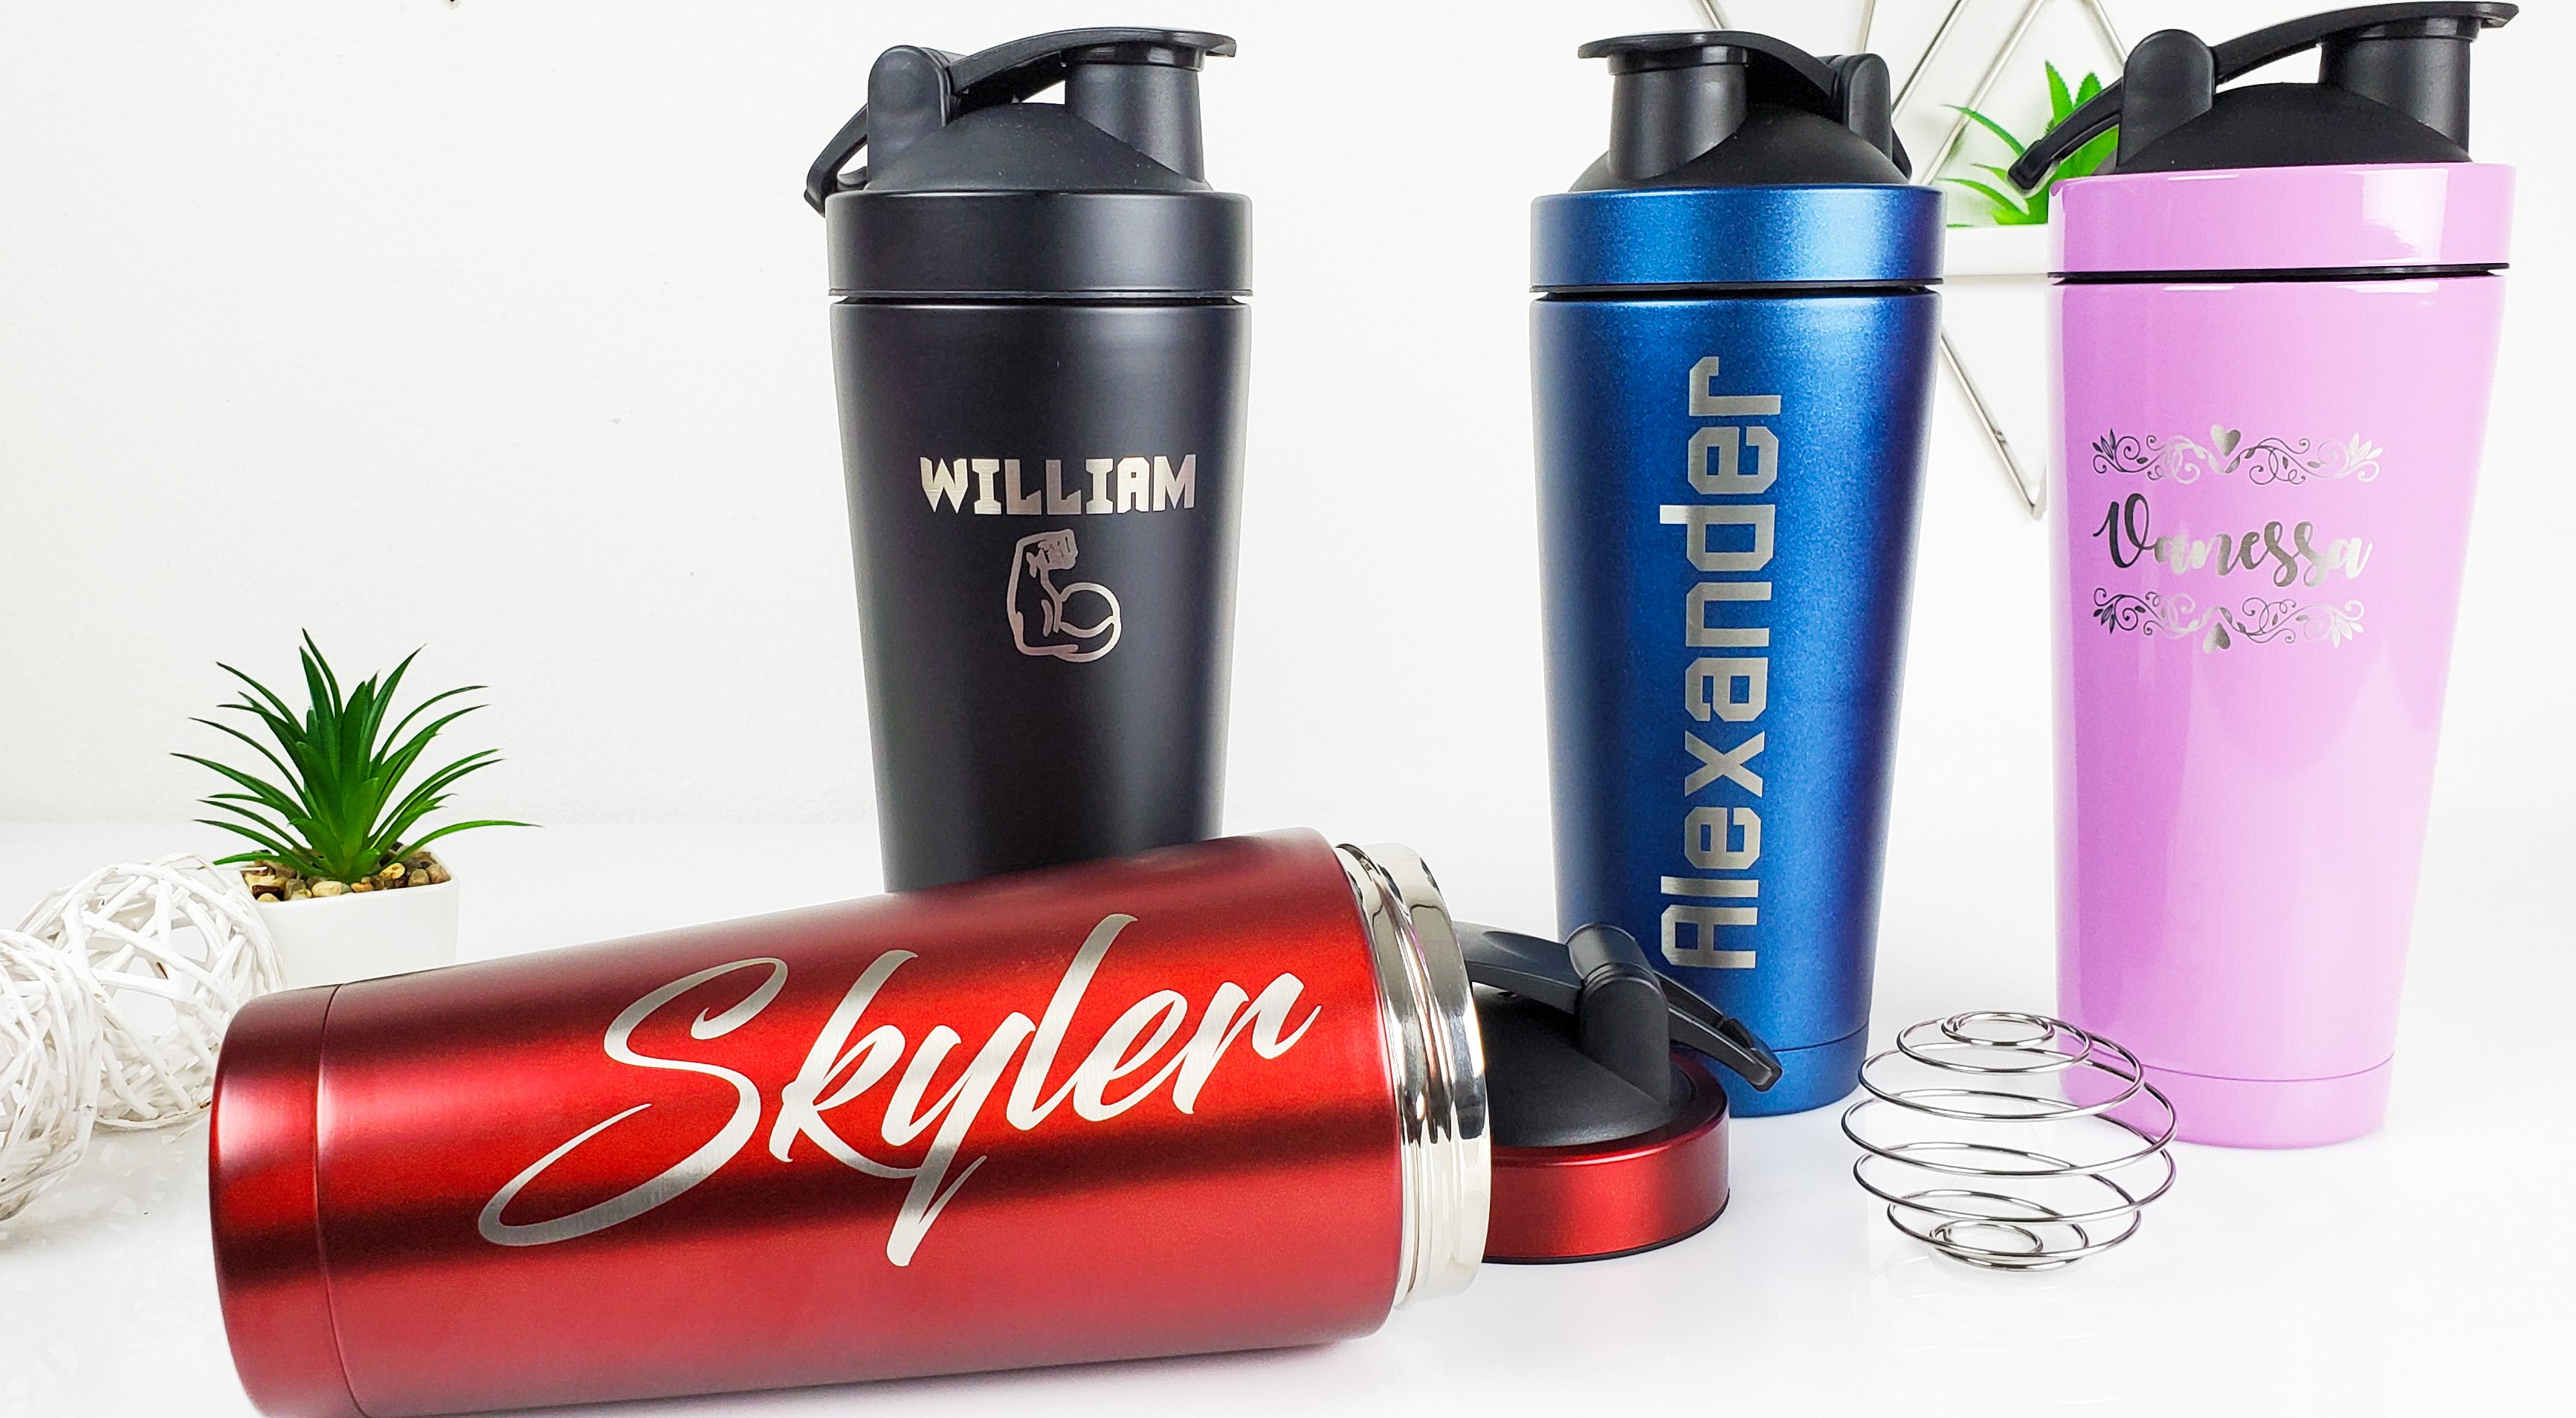 Fitness Shaker Bottle 24 Oz. - Personalization Available